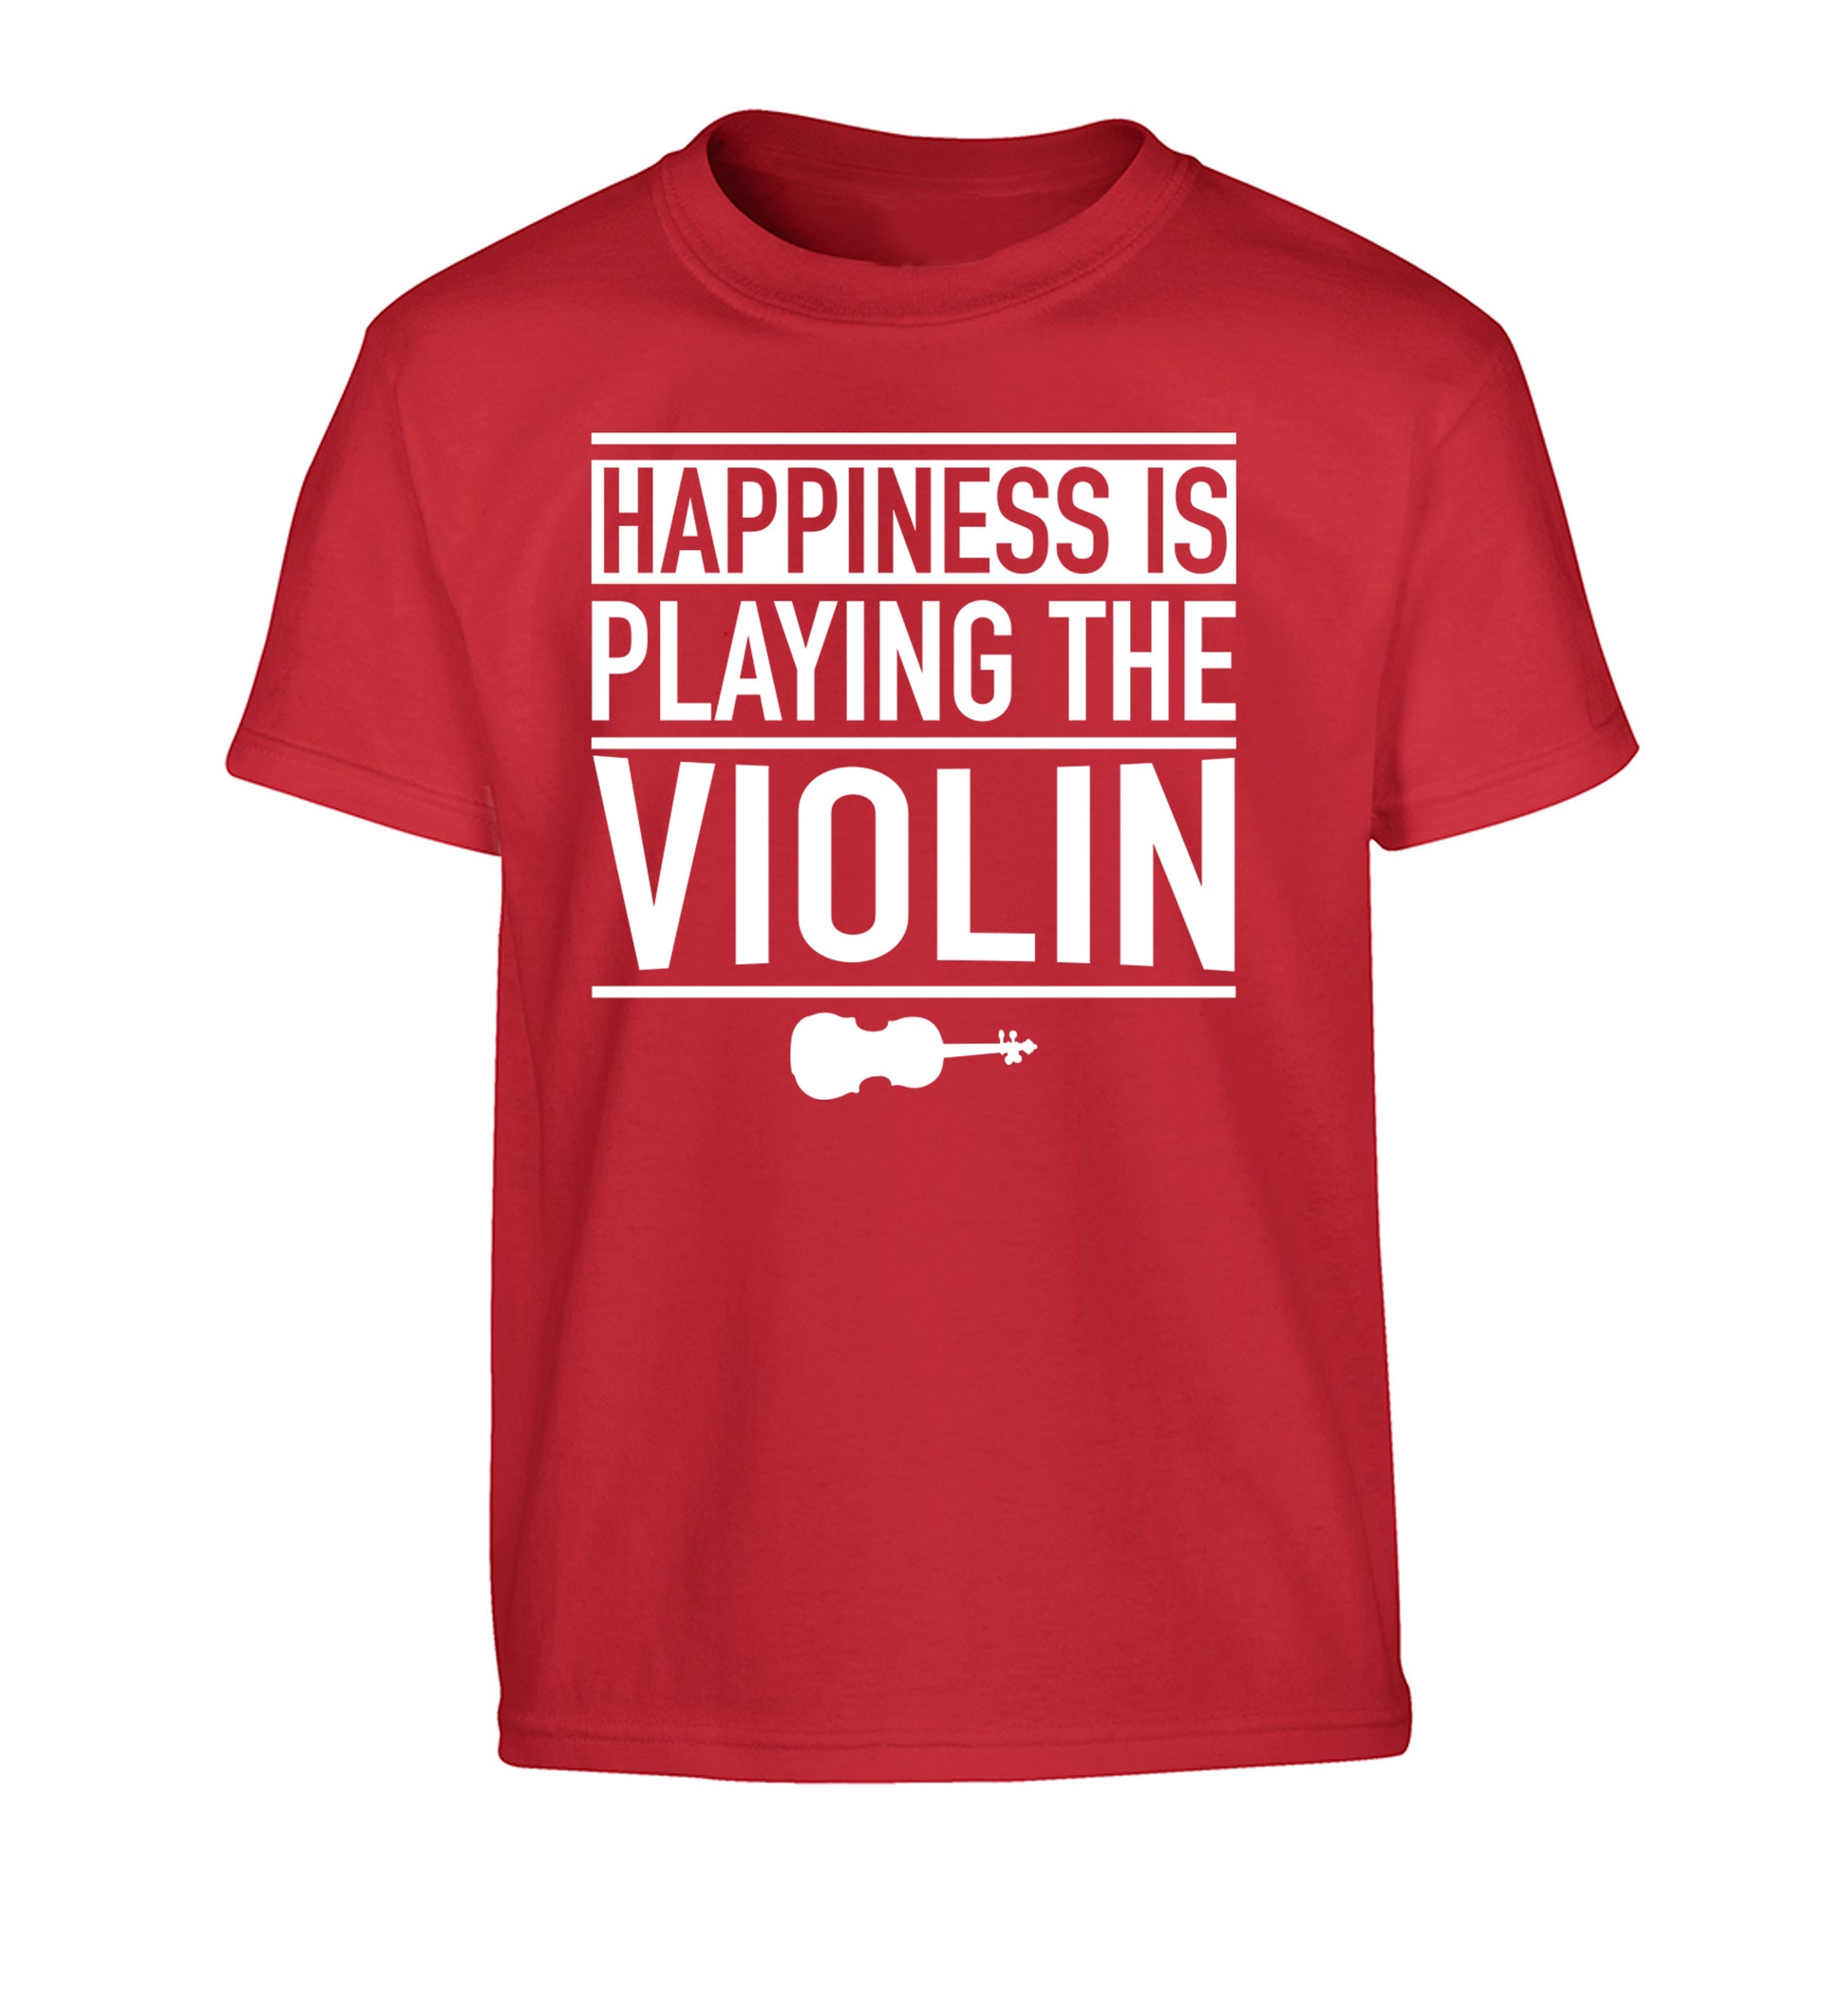 Happiness is playing the violin Children's red Tshirt 12-13 Years